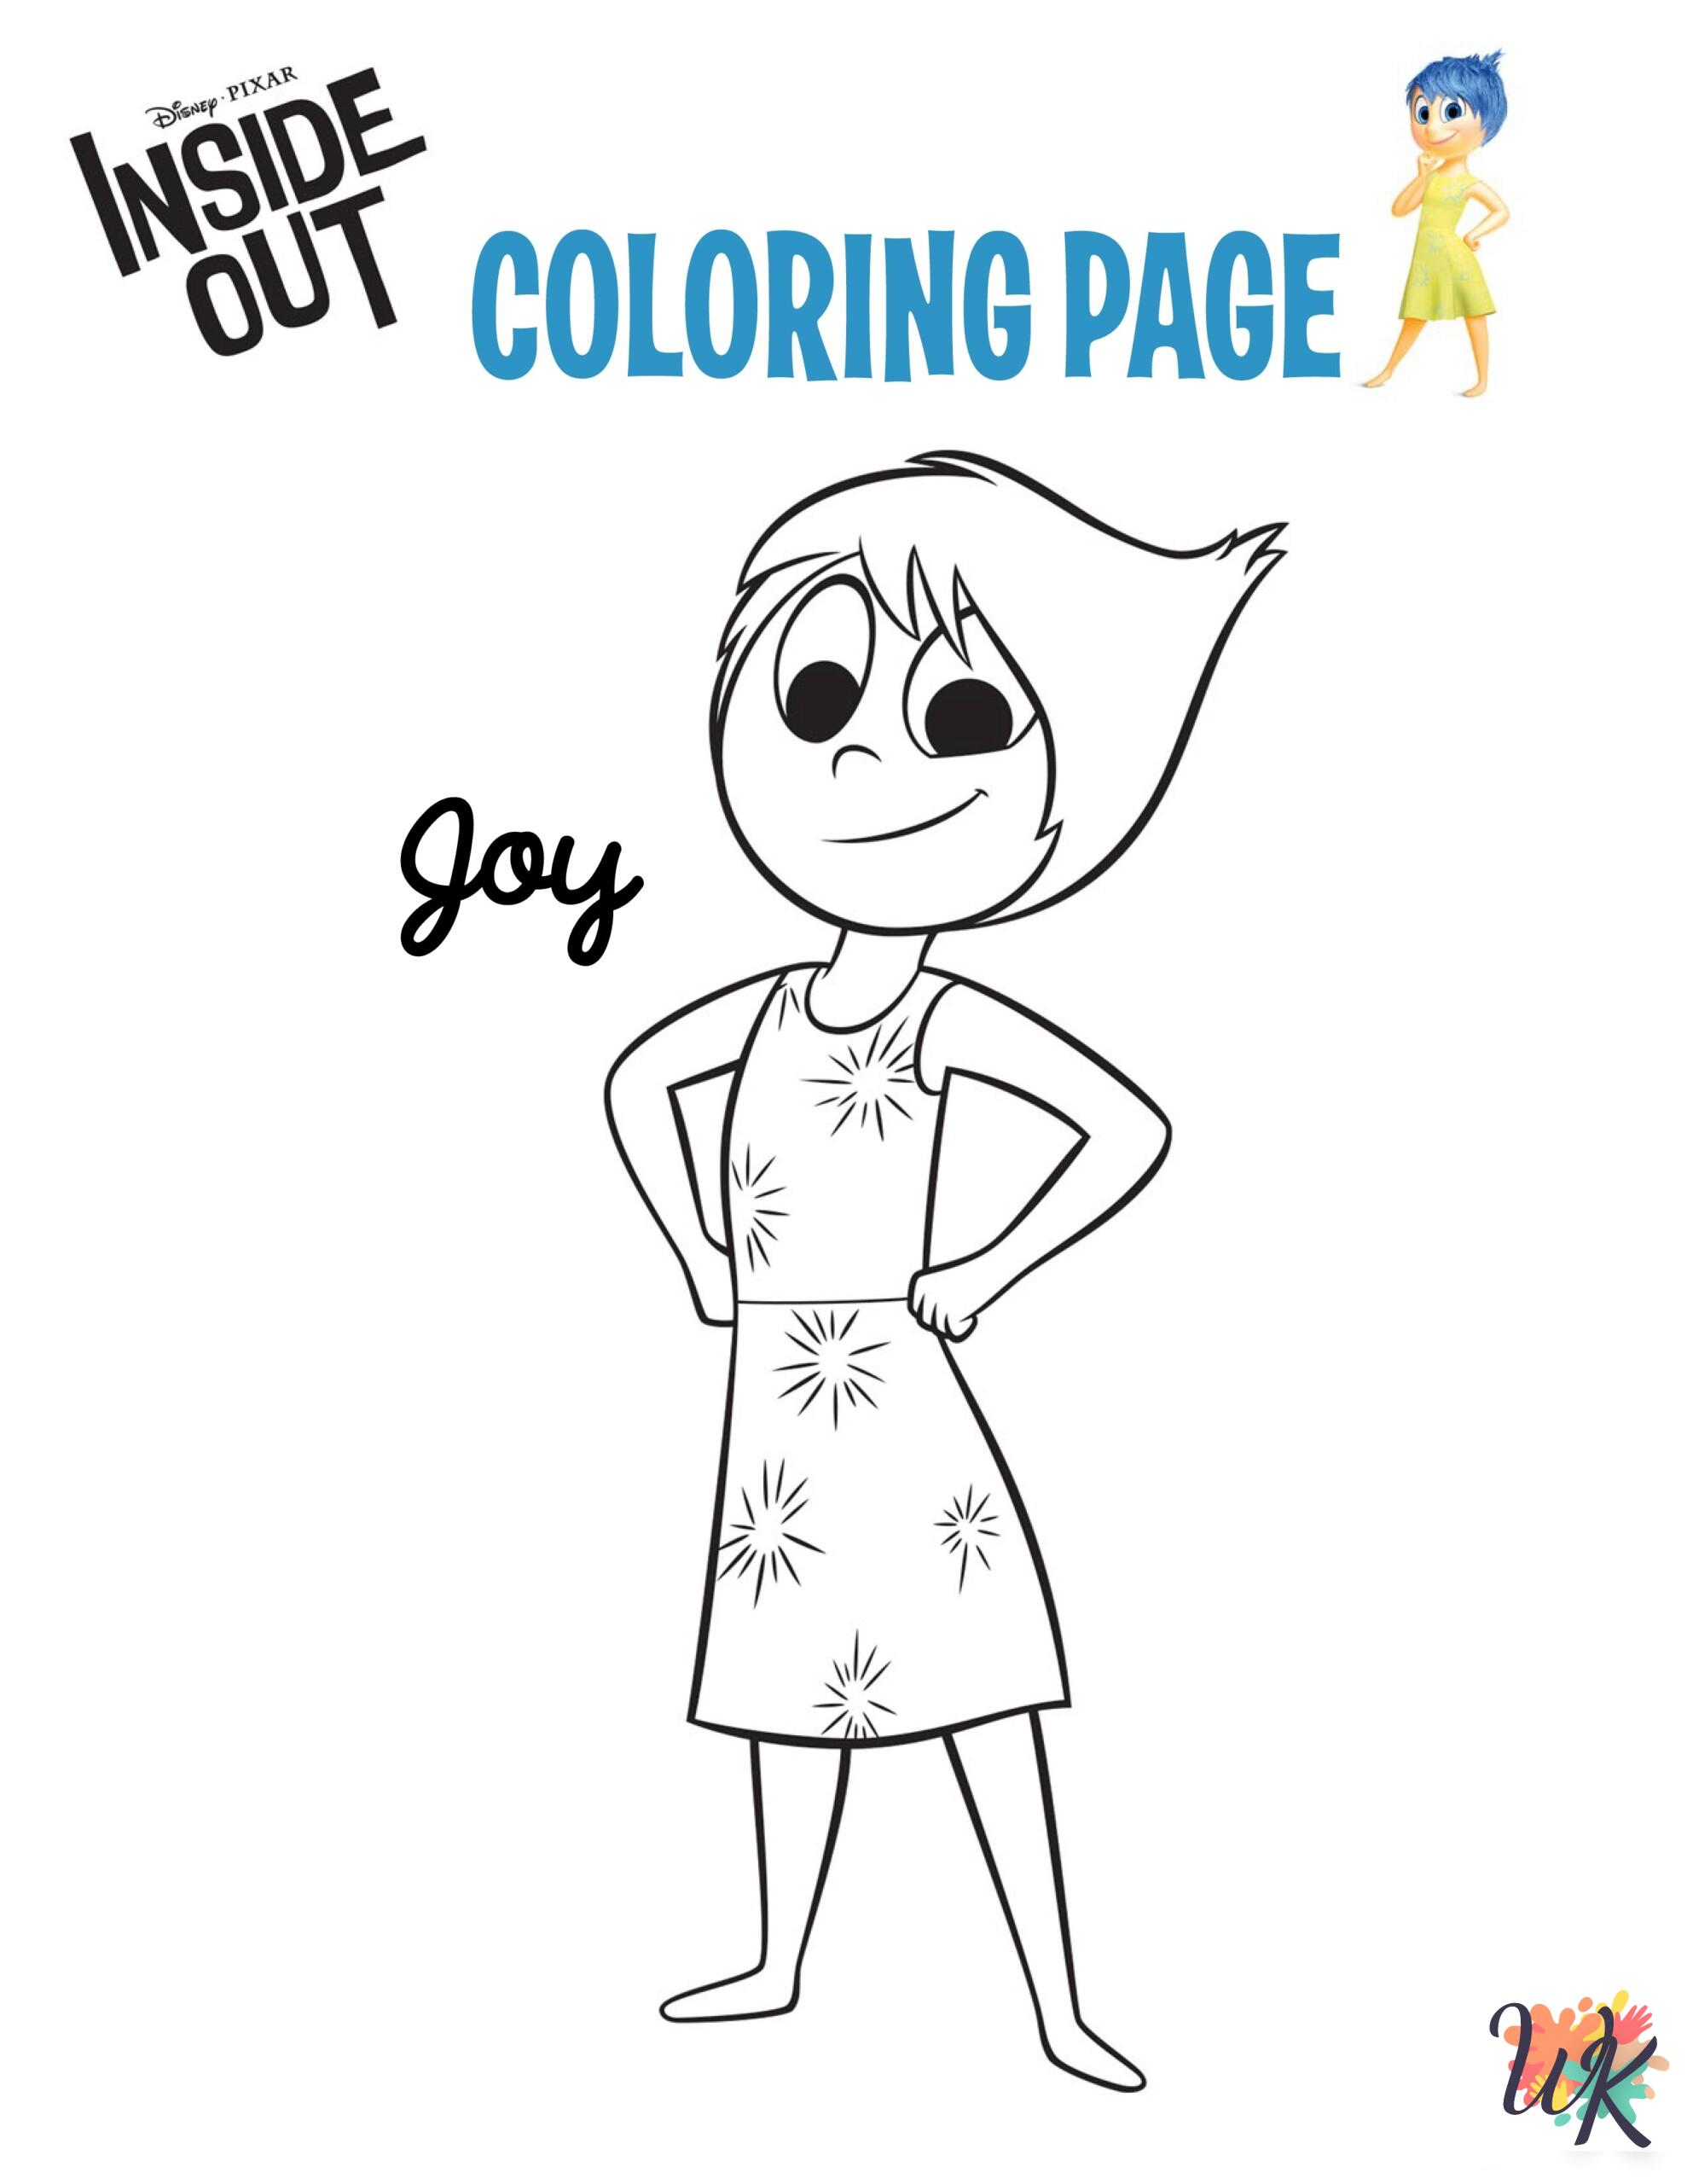 Inside Out coloring pages for adults easy